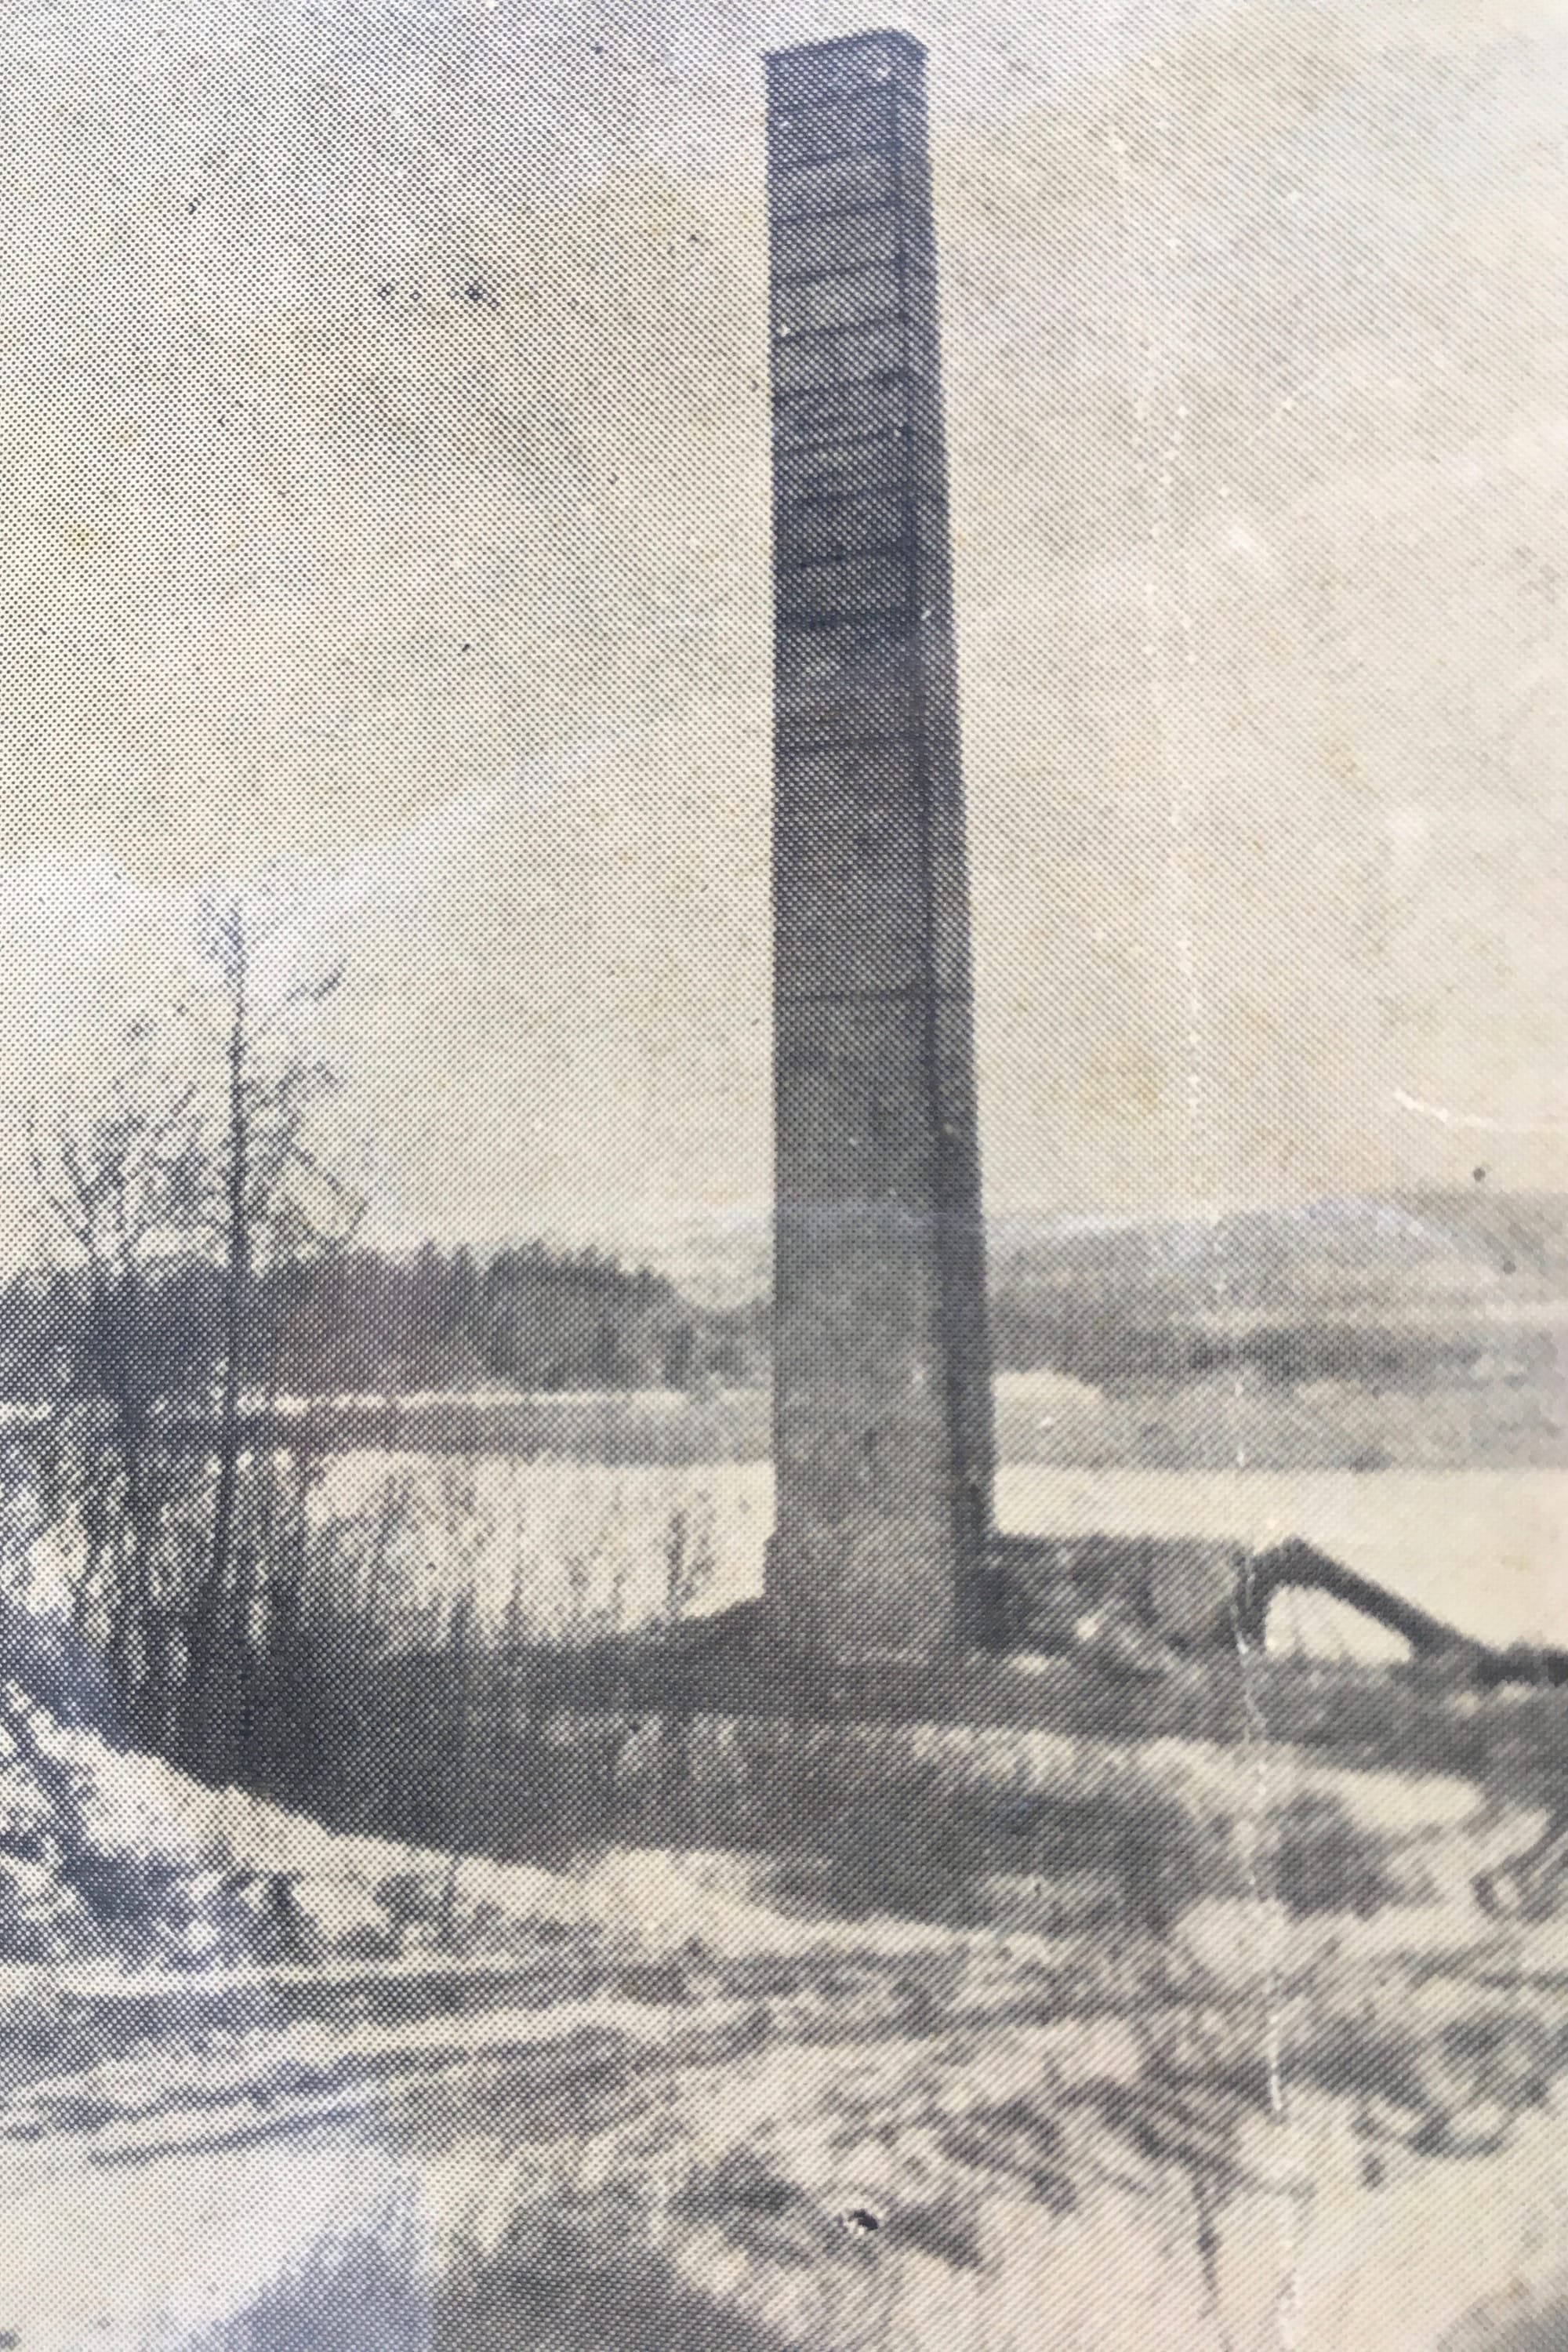 Mill Chimney, early 1900s